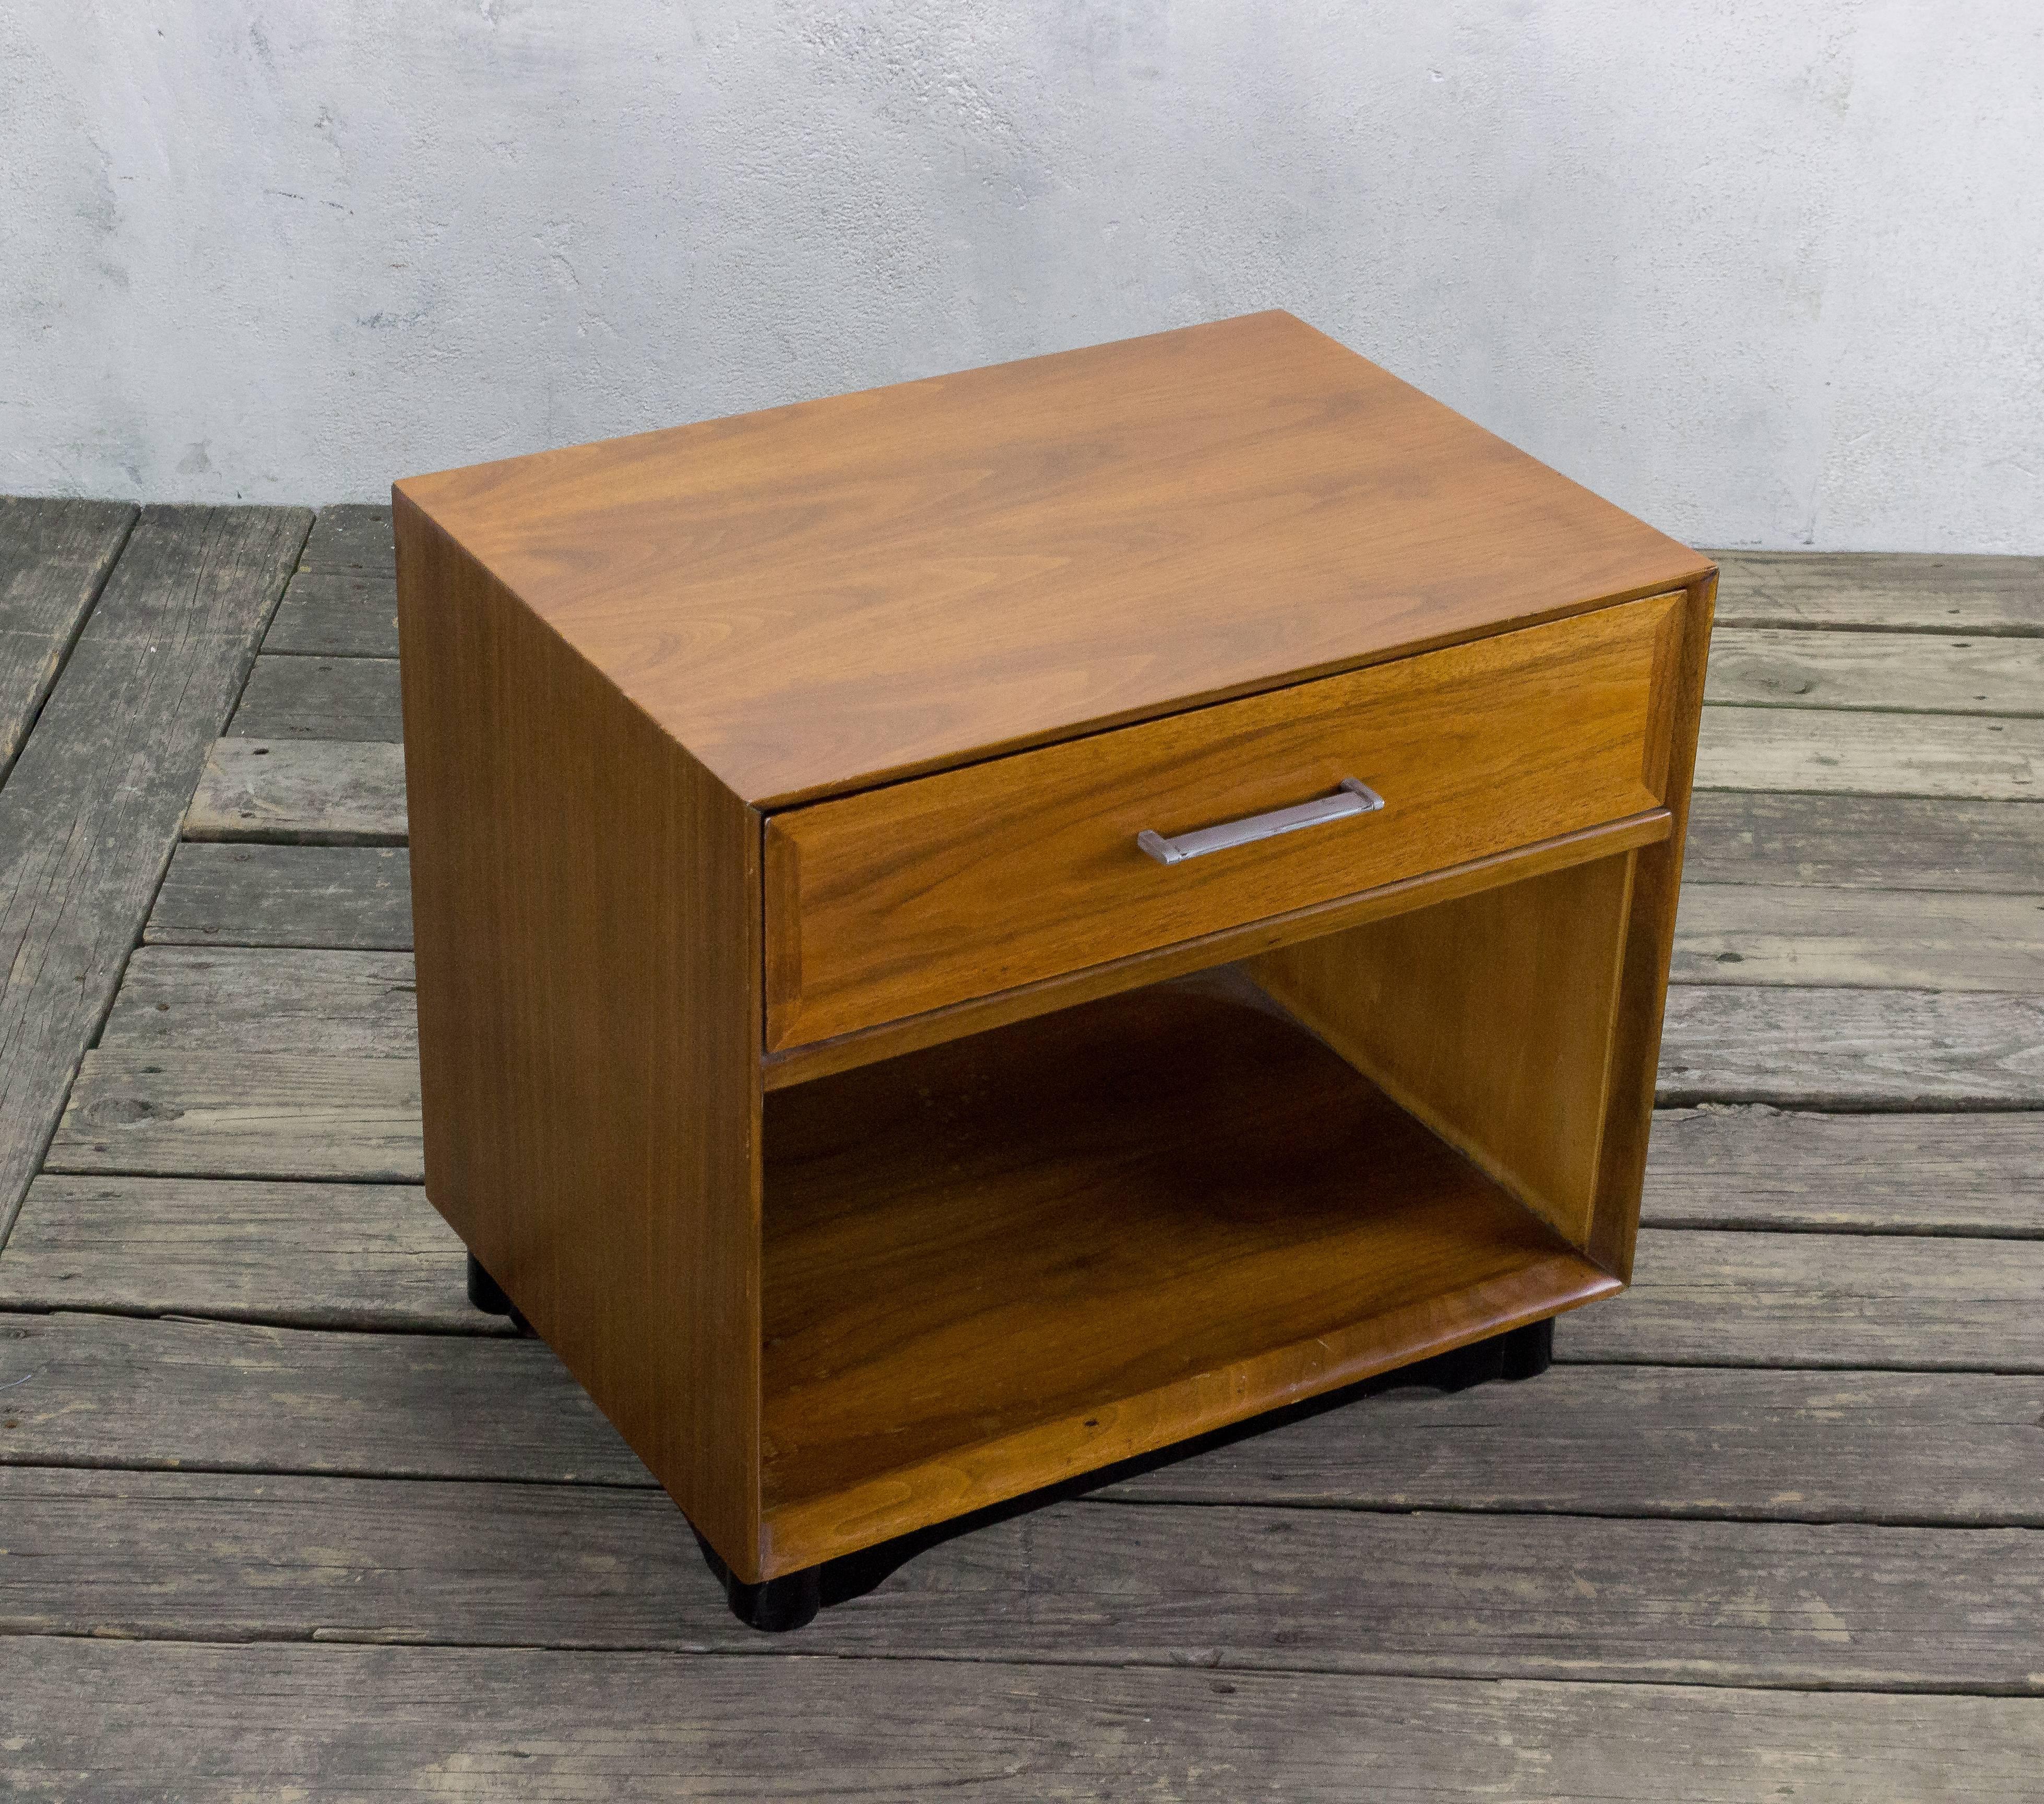 Mid-Century Modern nightstand with a single drawer and an ebonized base.